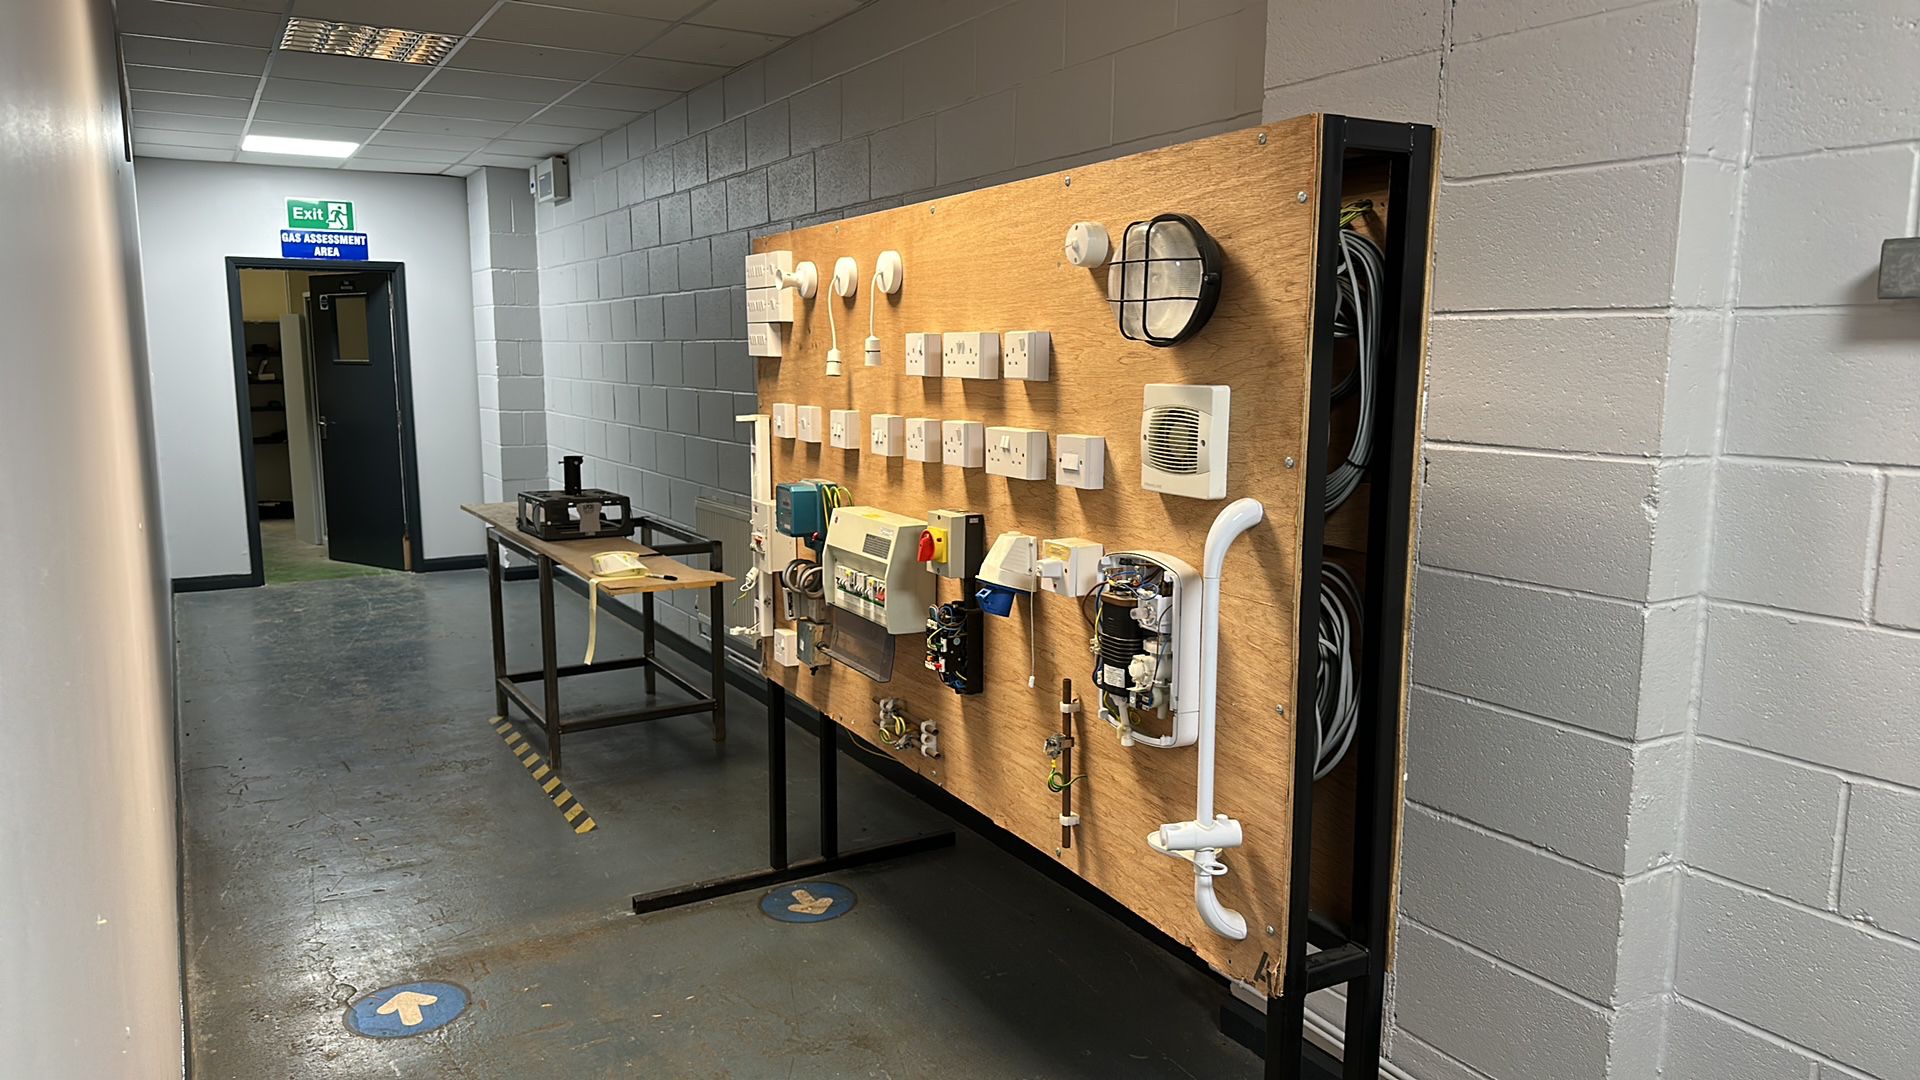 College Electrical Training Board - Image 2 of 4